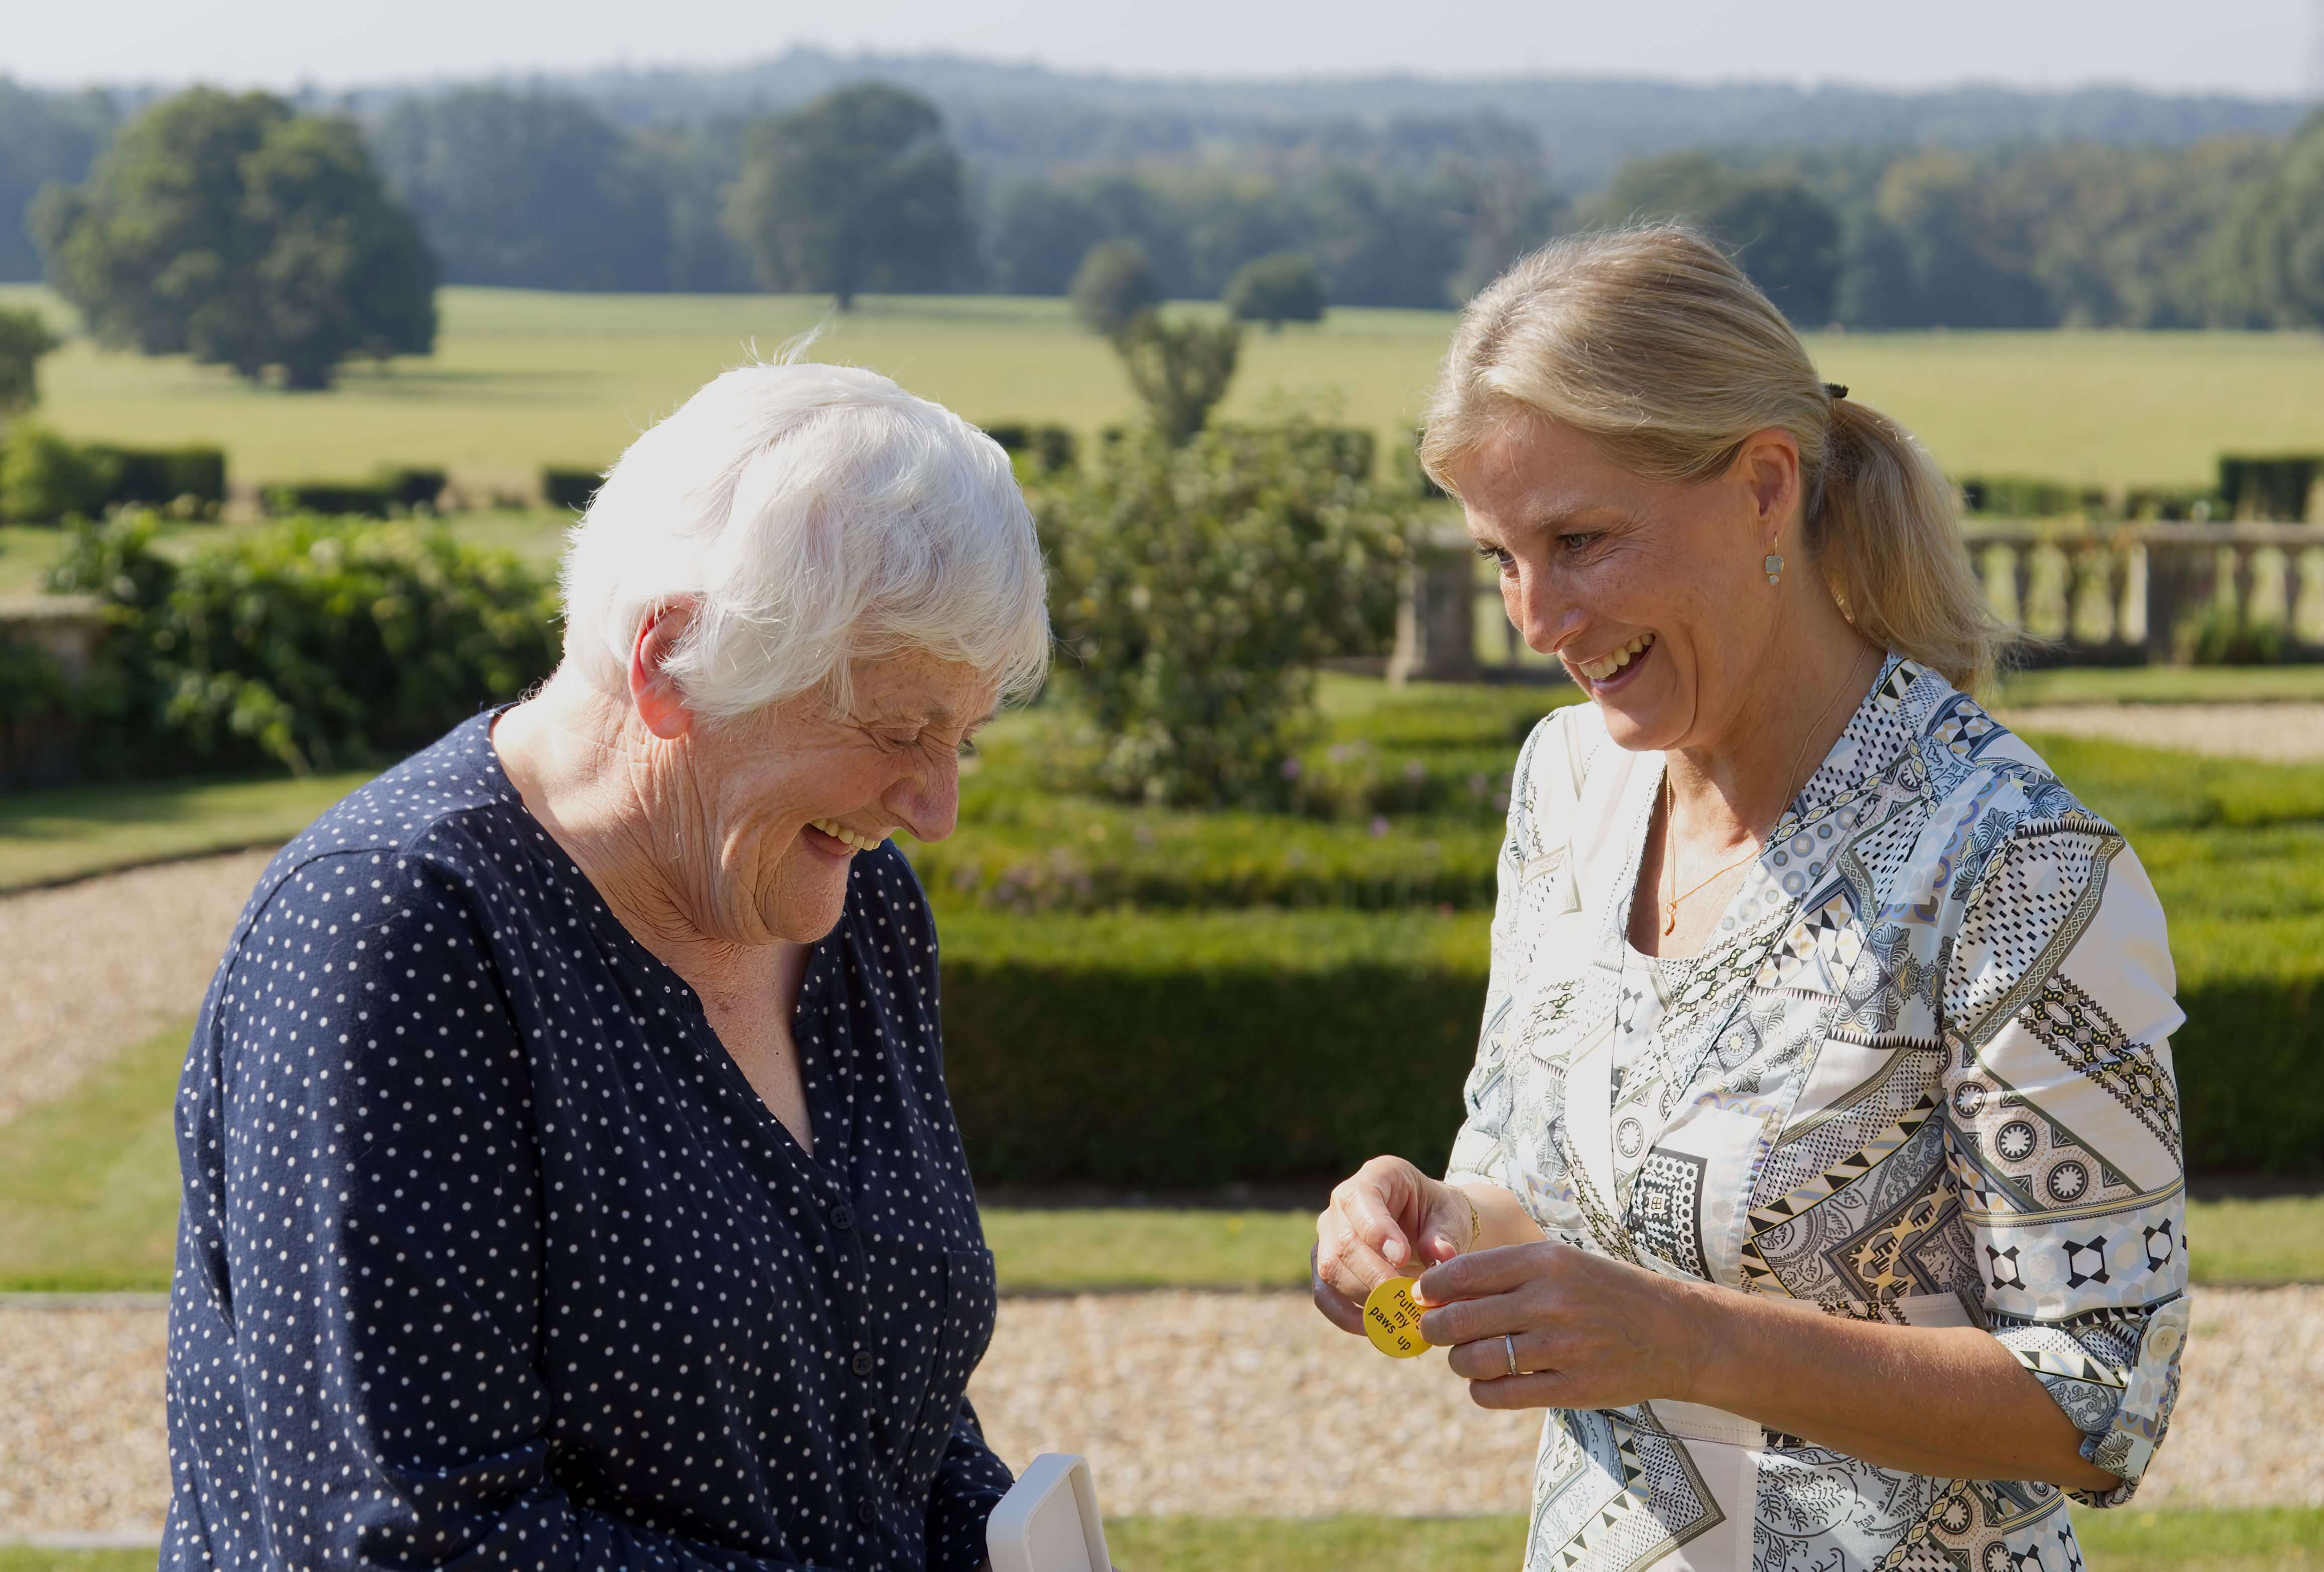 HRH The Duchess of Edinburgh smiles with guide dog owner Mary Pitman. The green landscaped gardens of Bagshot Park are in the background.